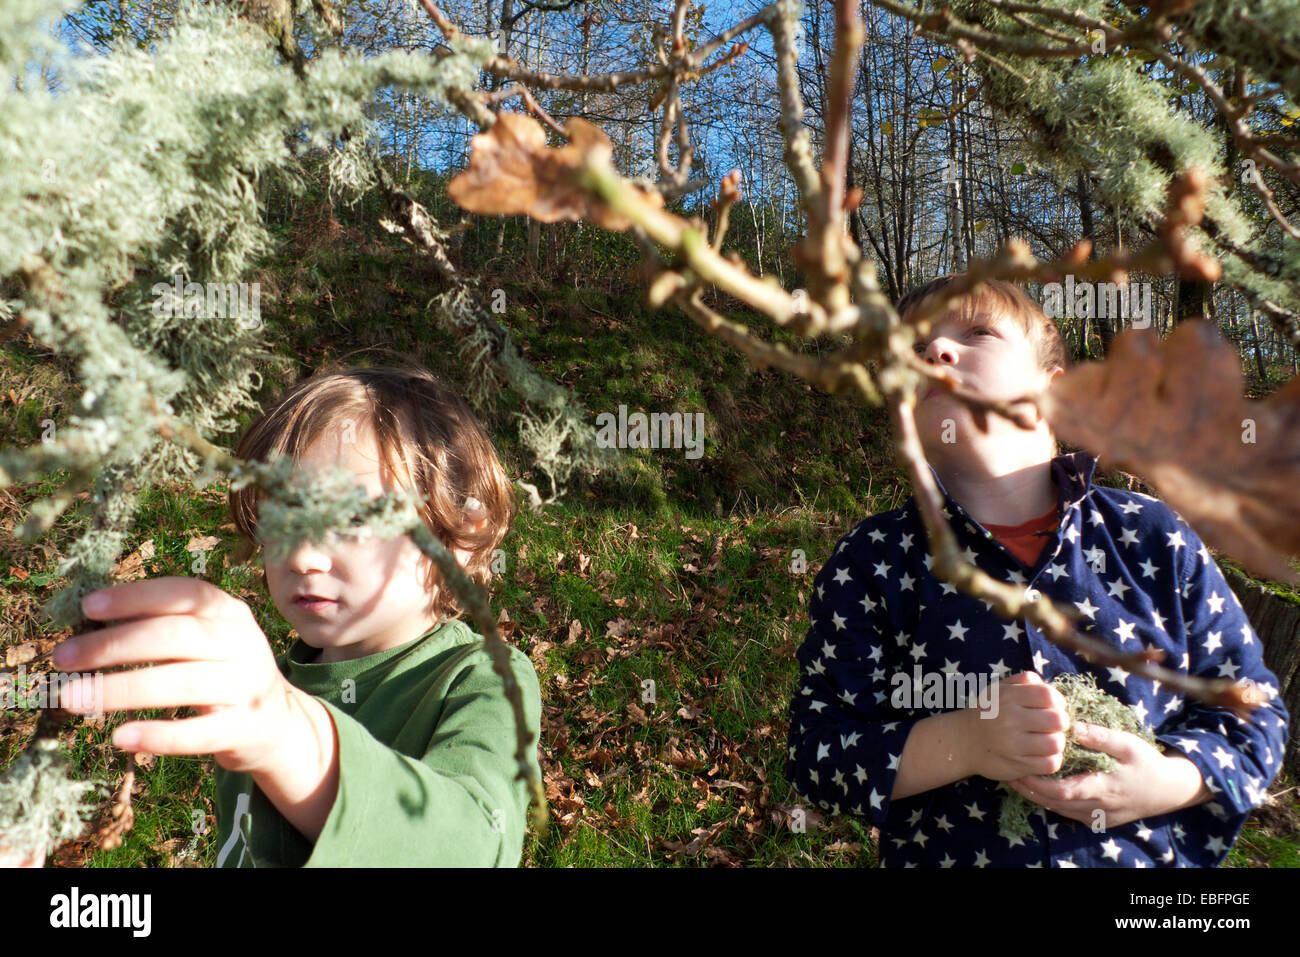 Carmarthenshire, Wales, UK. 30th Nov 2014.  Boys play outside in unusually mild weather for the end of November collecting lichen from the branches of an oak tree.  Kathy deWitt/AlamyLiveNews Stock Photo